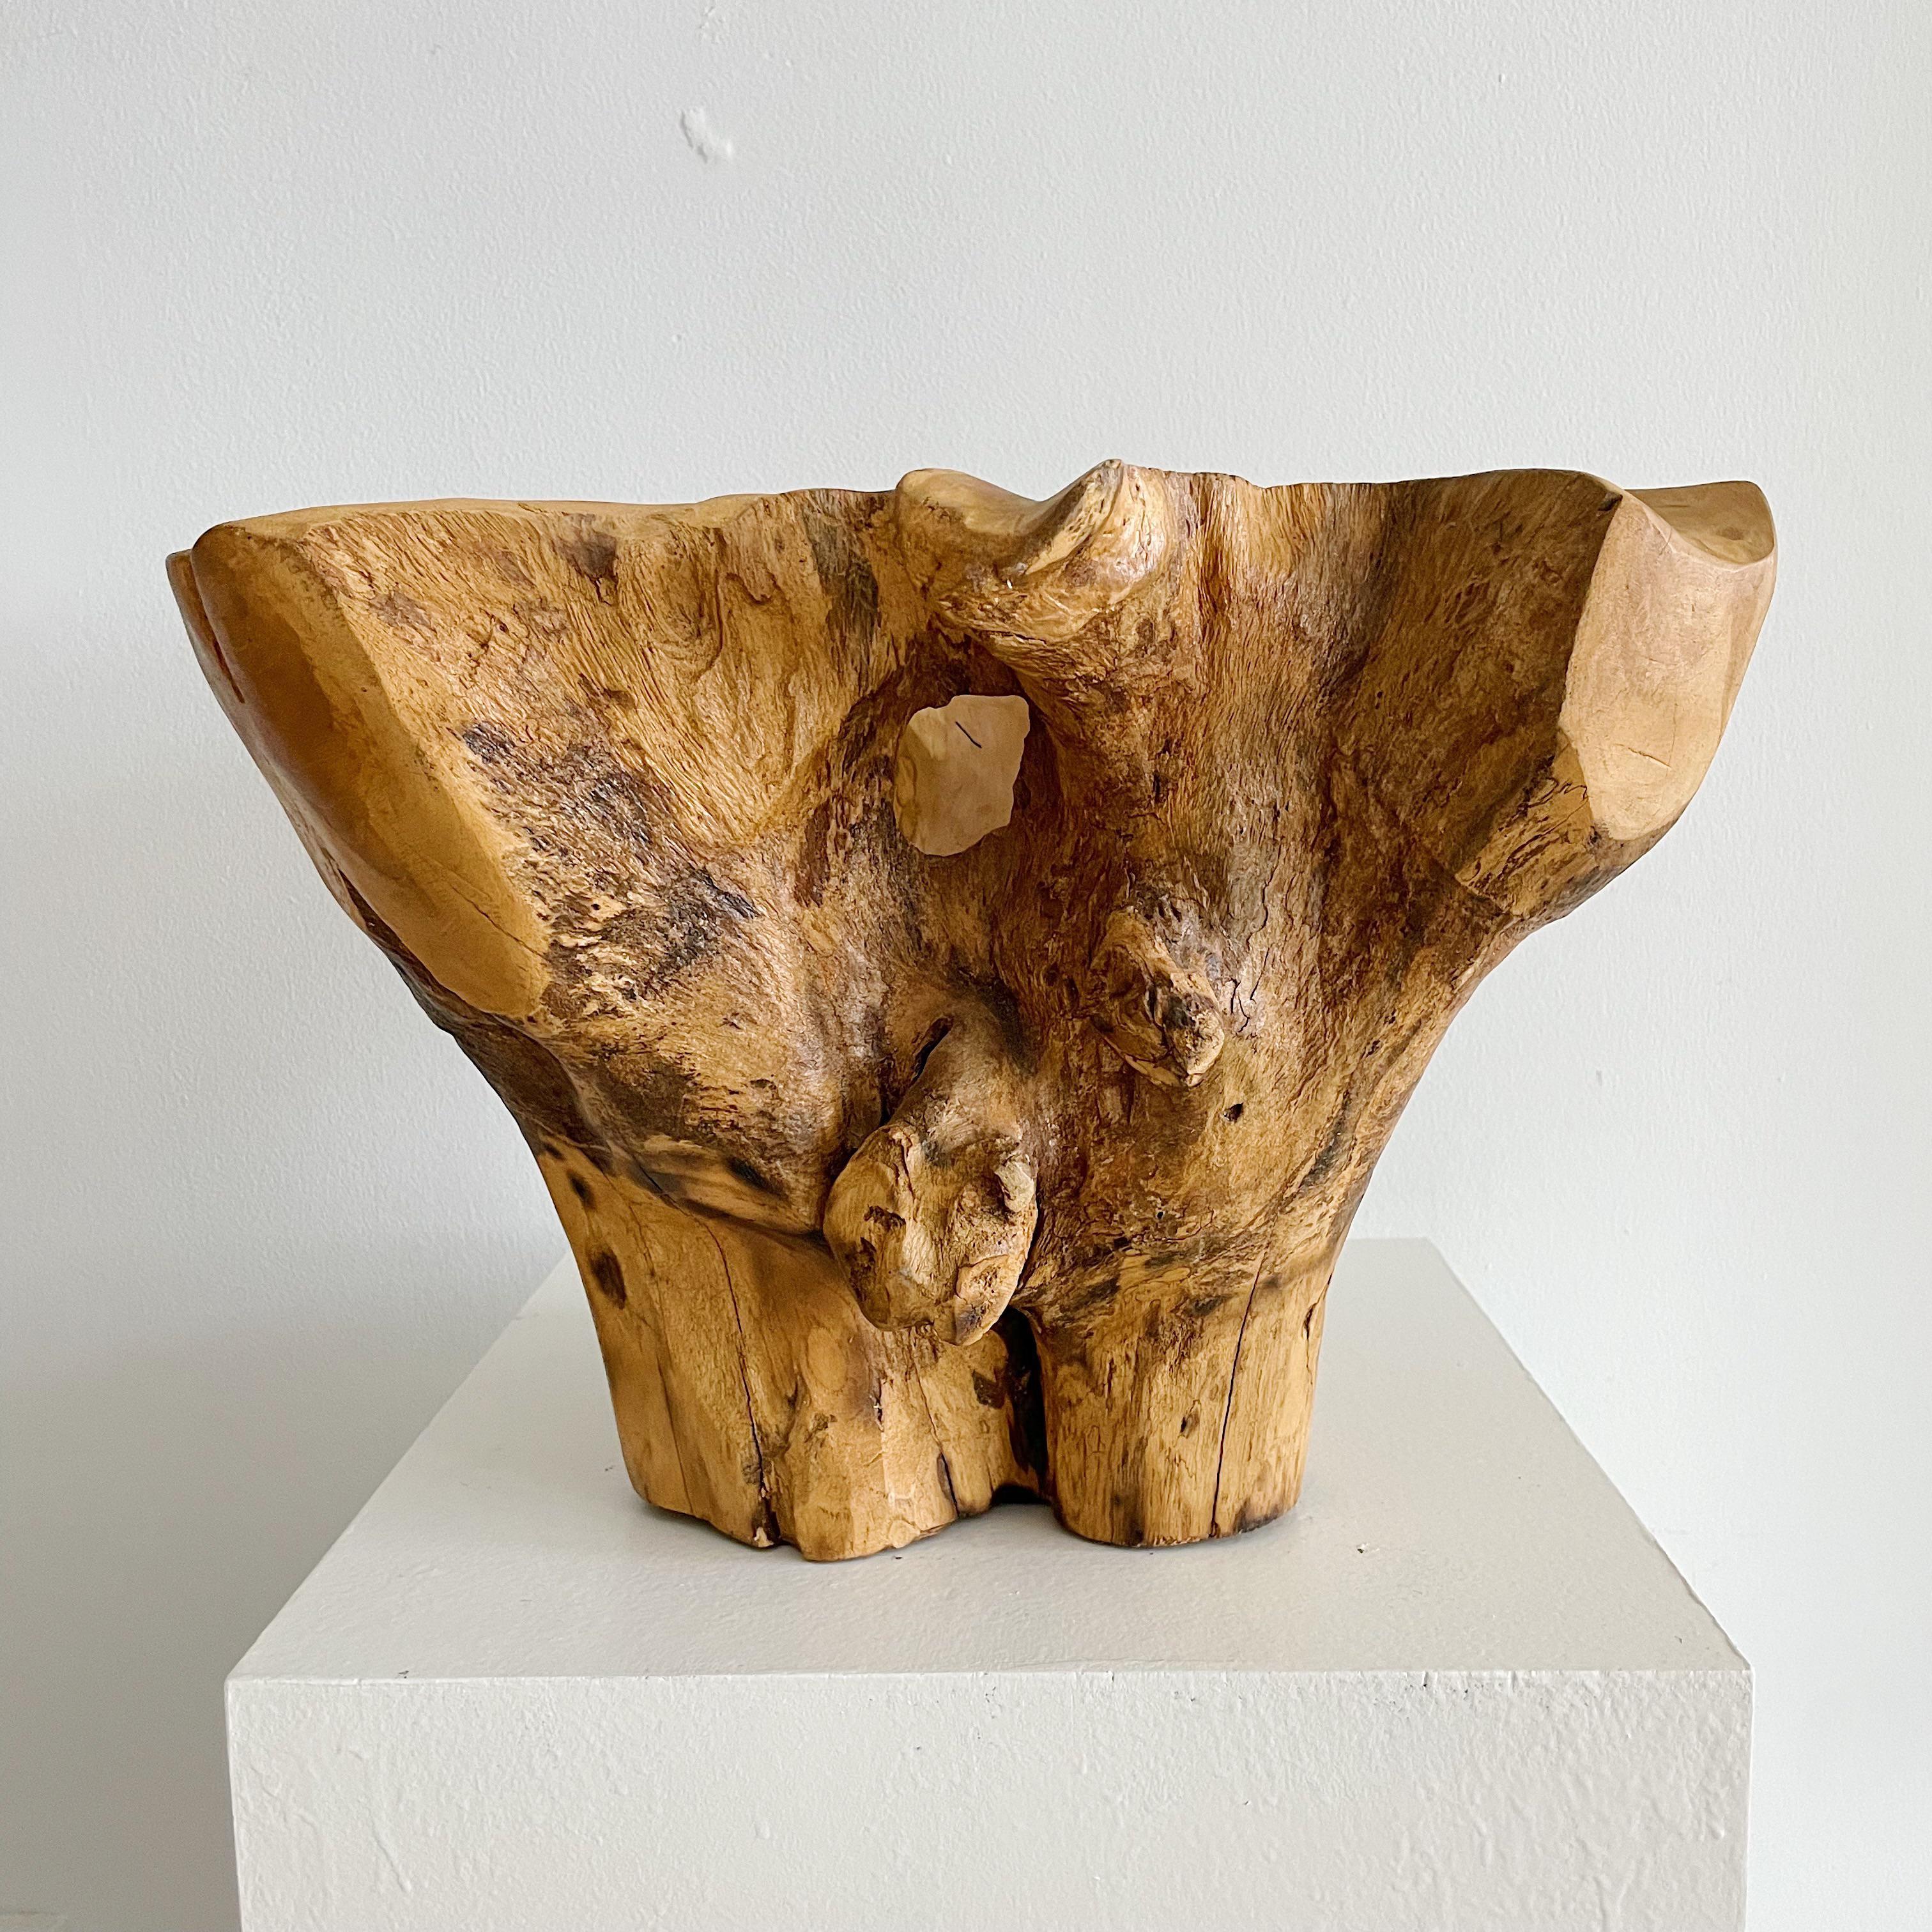 Hand-Carved Sculptural Organic Wood Centerpiece Bowl For Sale